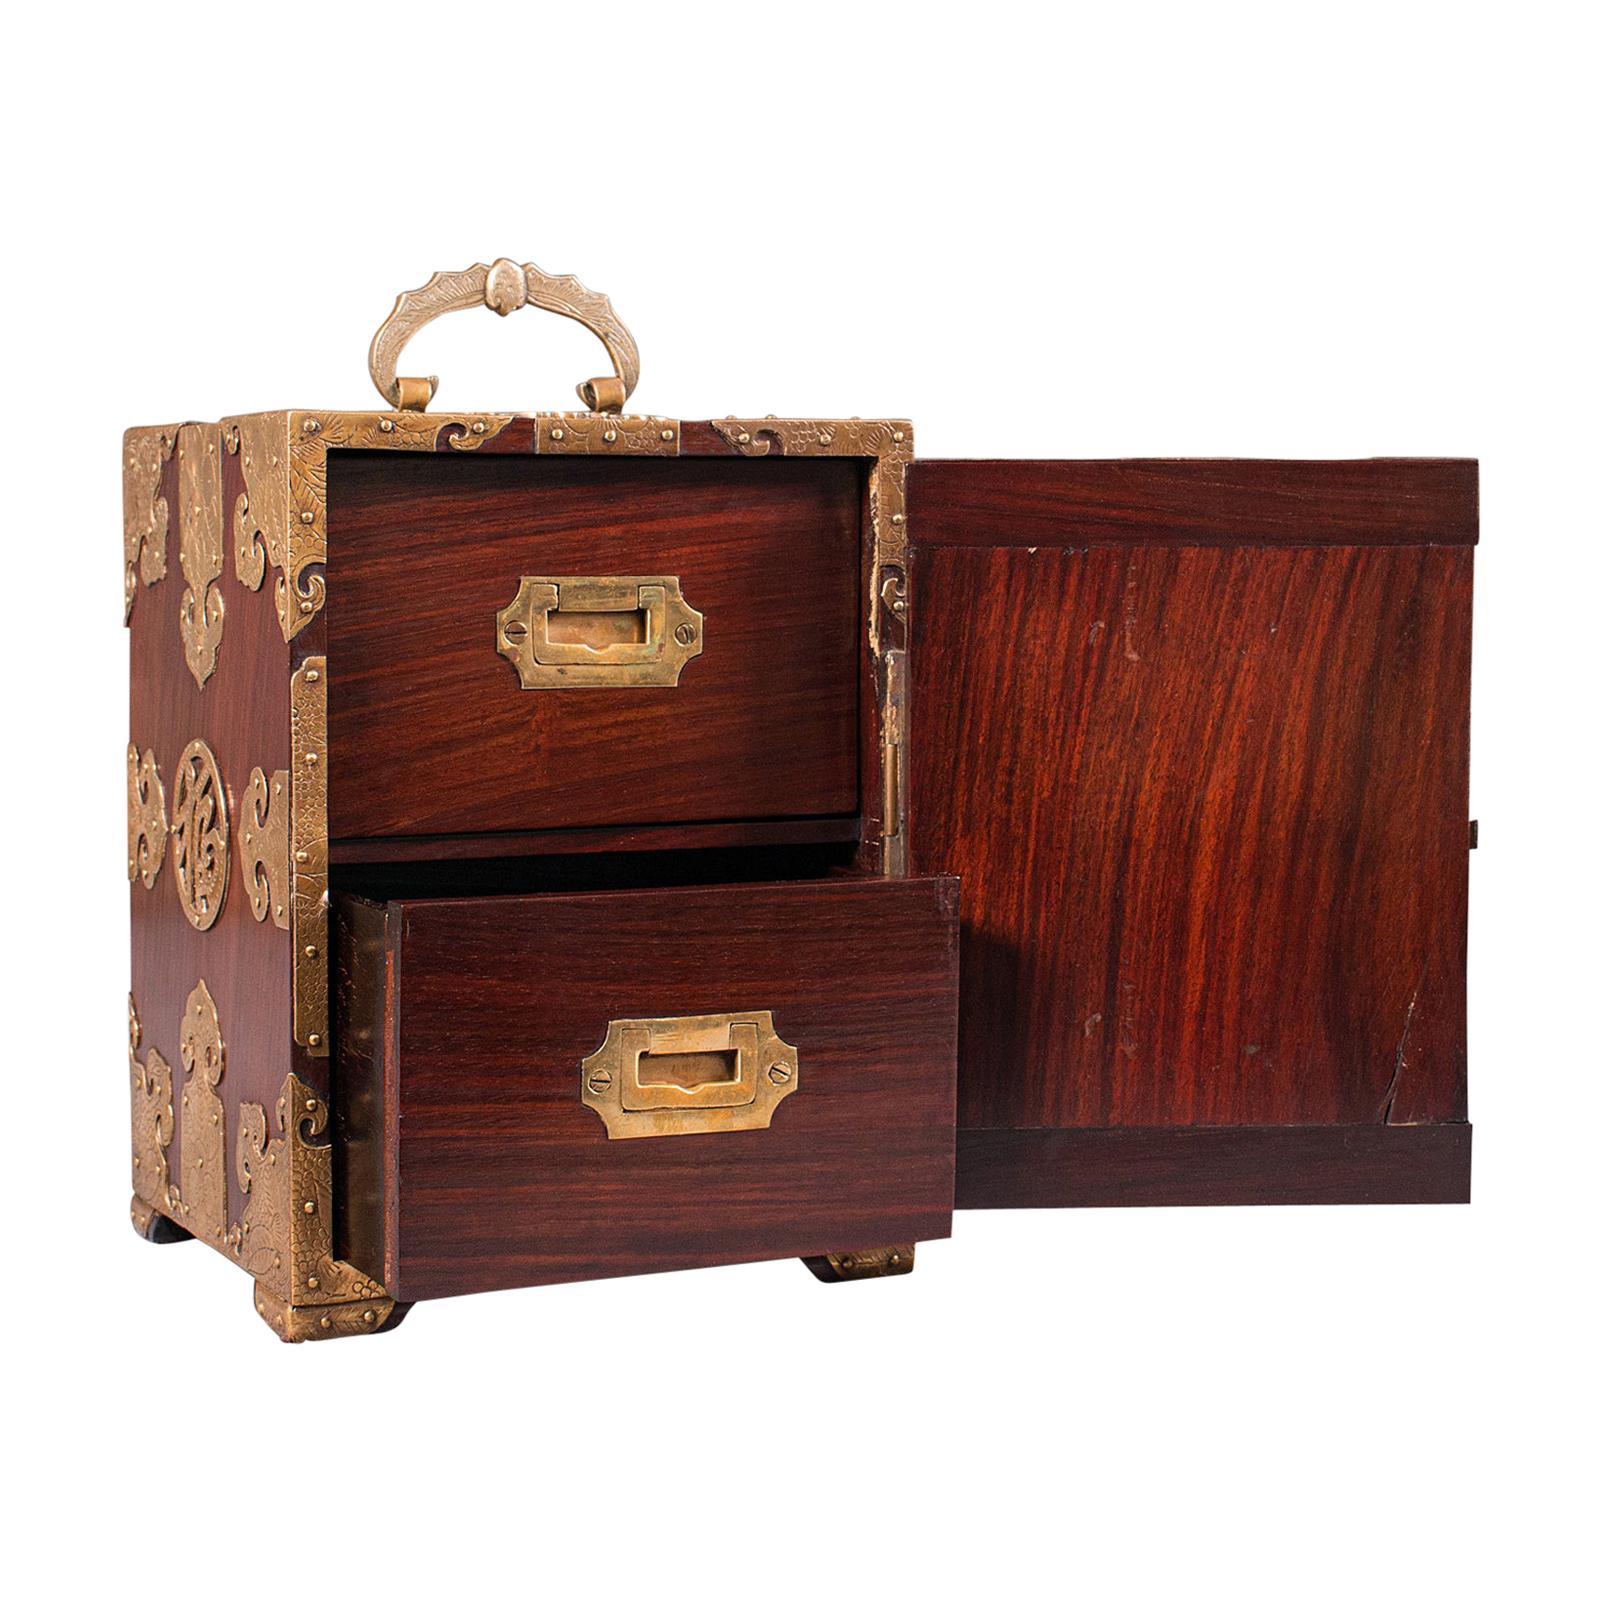 Antique Collector's Box, Chinese, Rosewood, Decorative Specimen Case, Circa 1920 For Sale